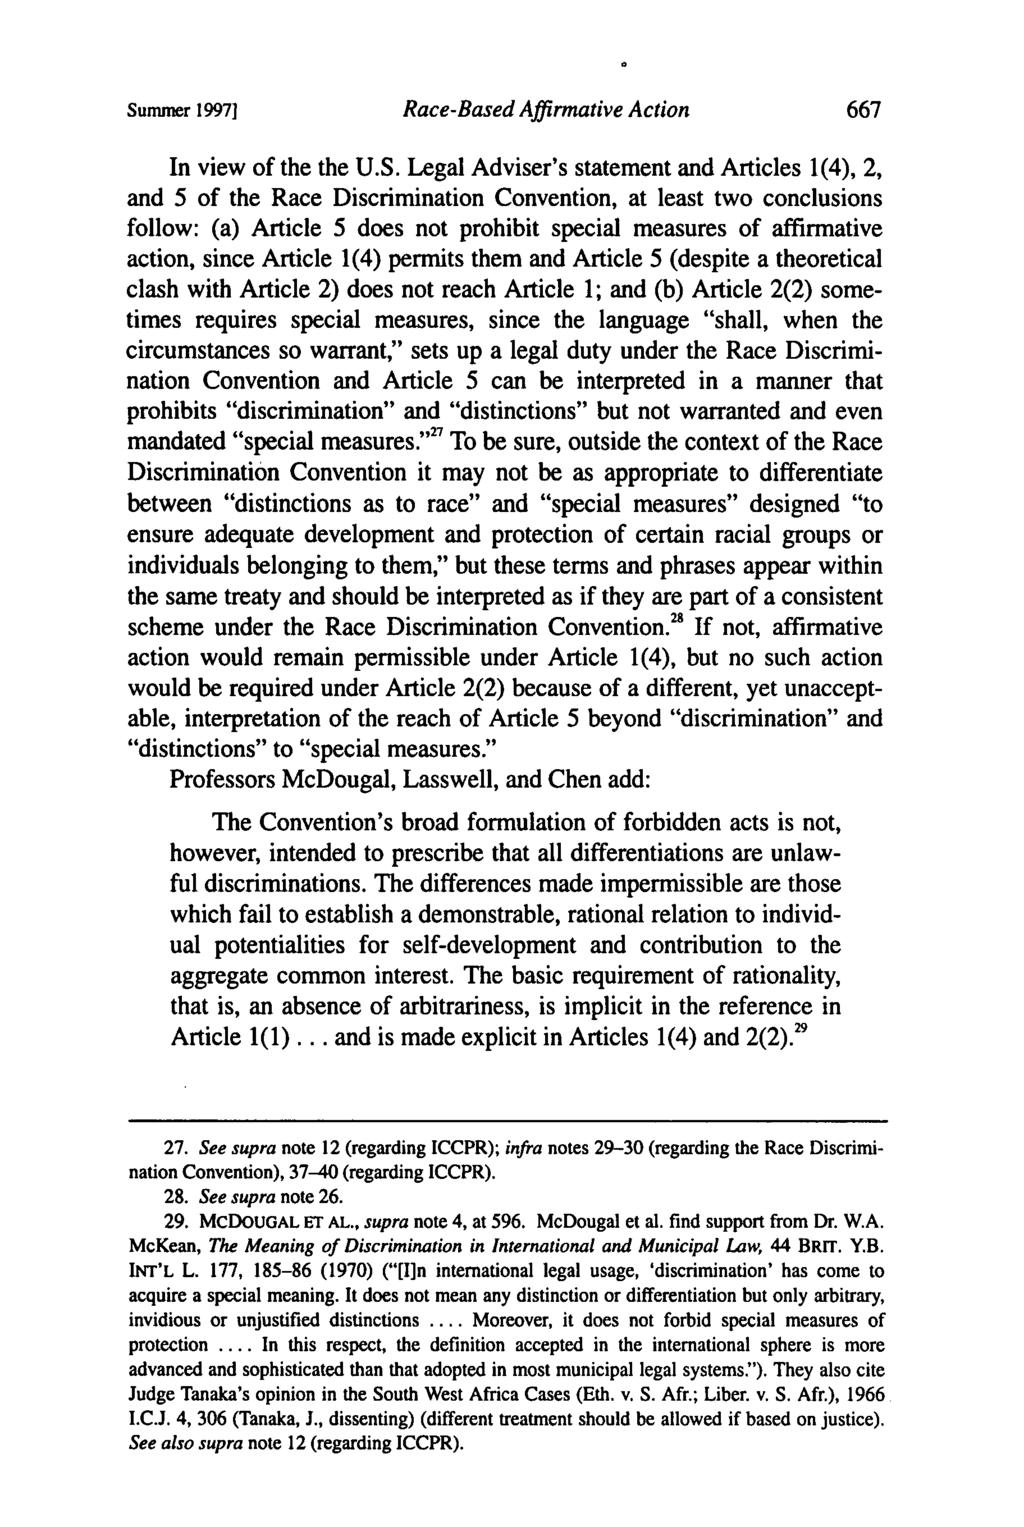 Summer 19971 Race-Based Affirmative Action In view of the the U.S. Legal Adviser's statement and Articles 1(4), 2, and 5 of the Race Discrimination Convention, at least two conclusions follow: (a)